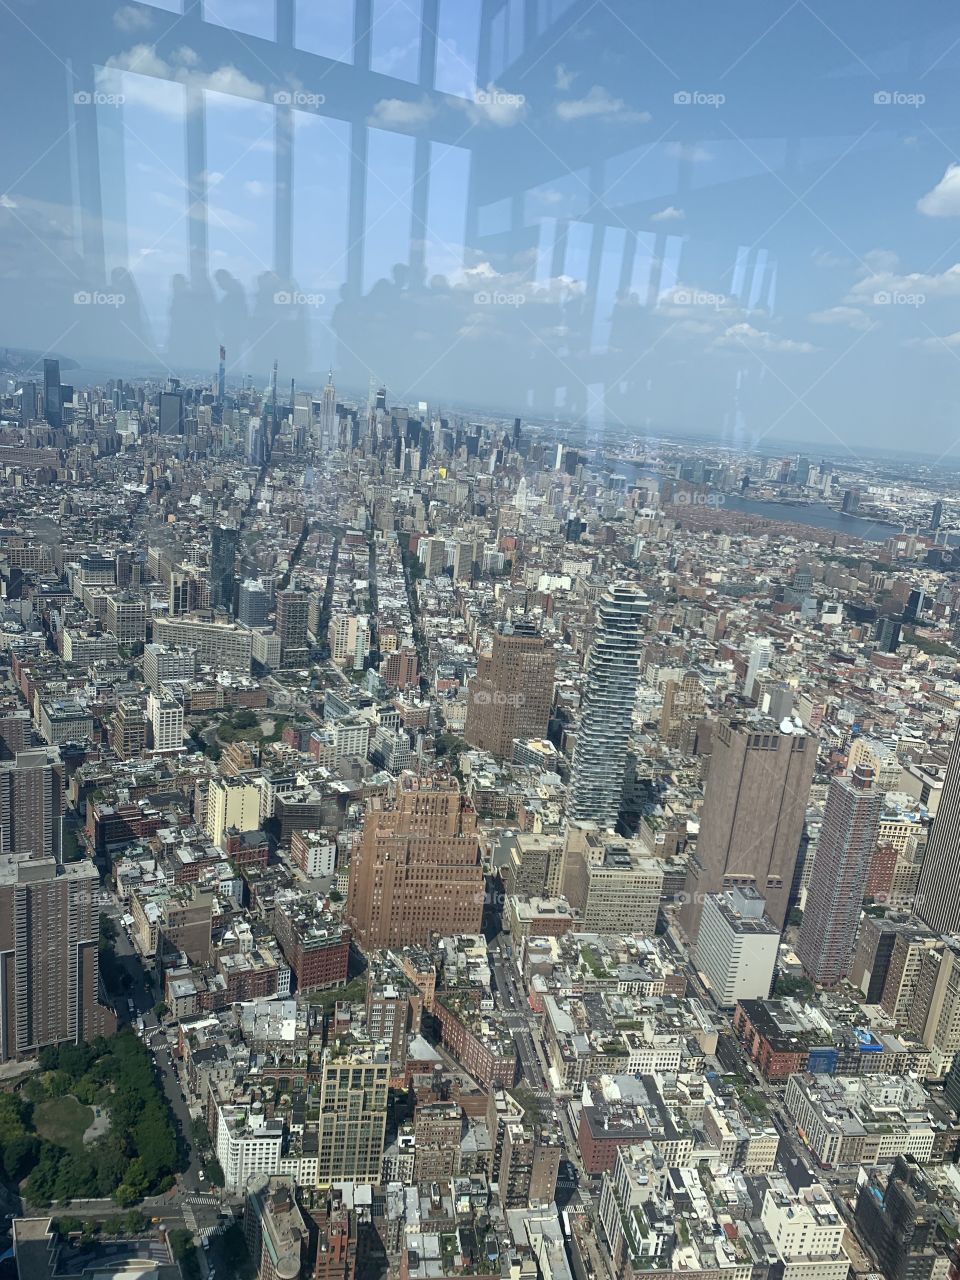 New York City view from the Freedom Tower (One World Observatory)